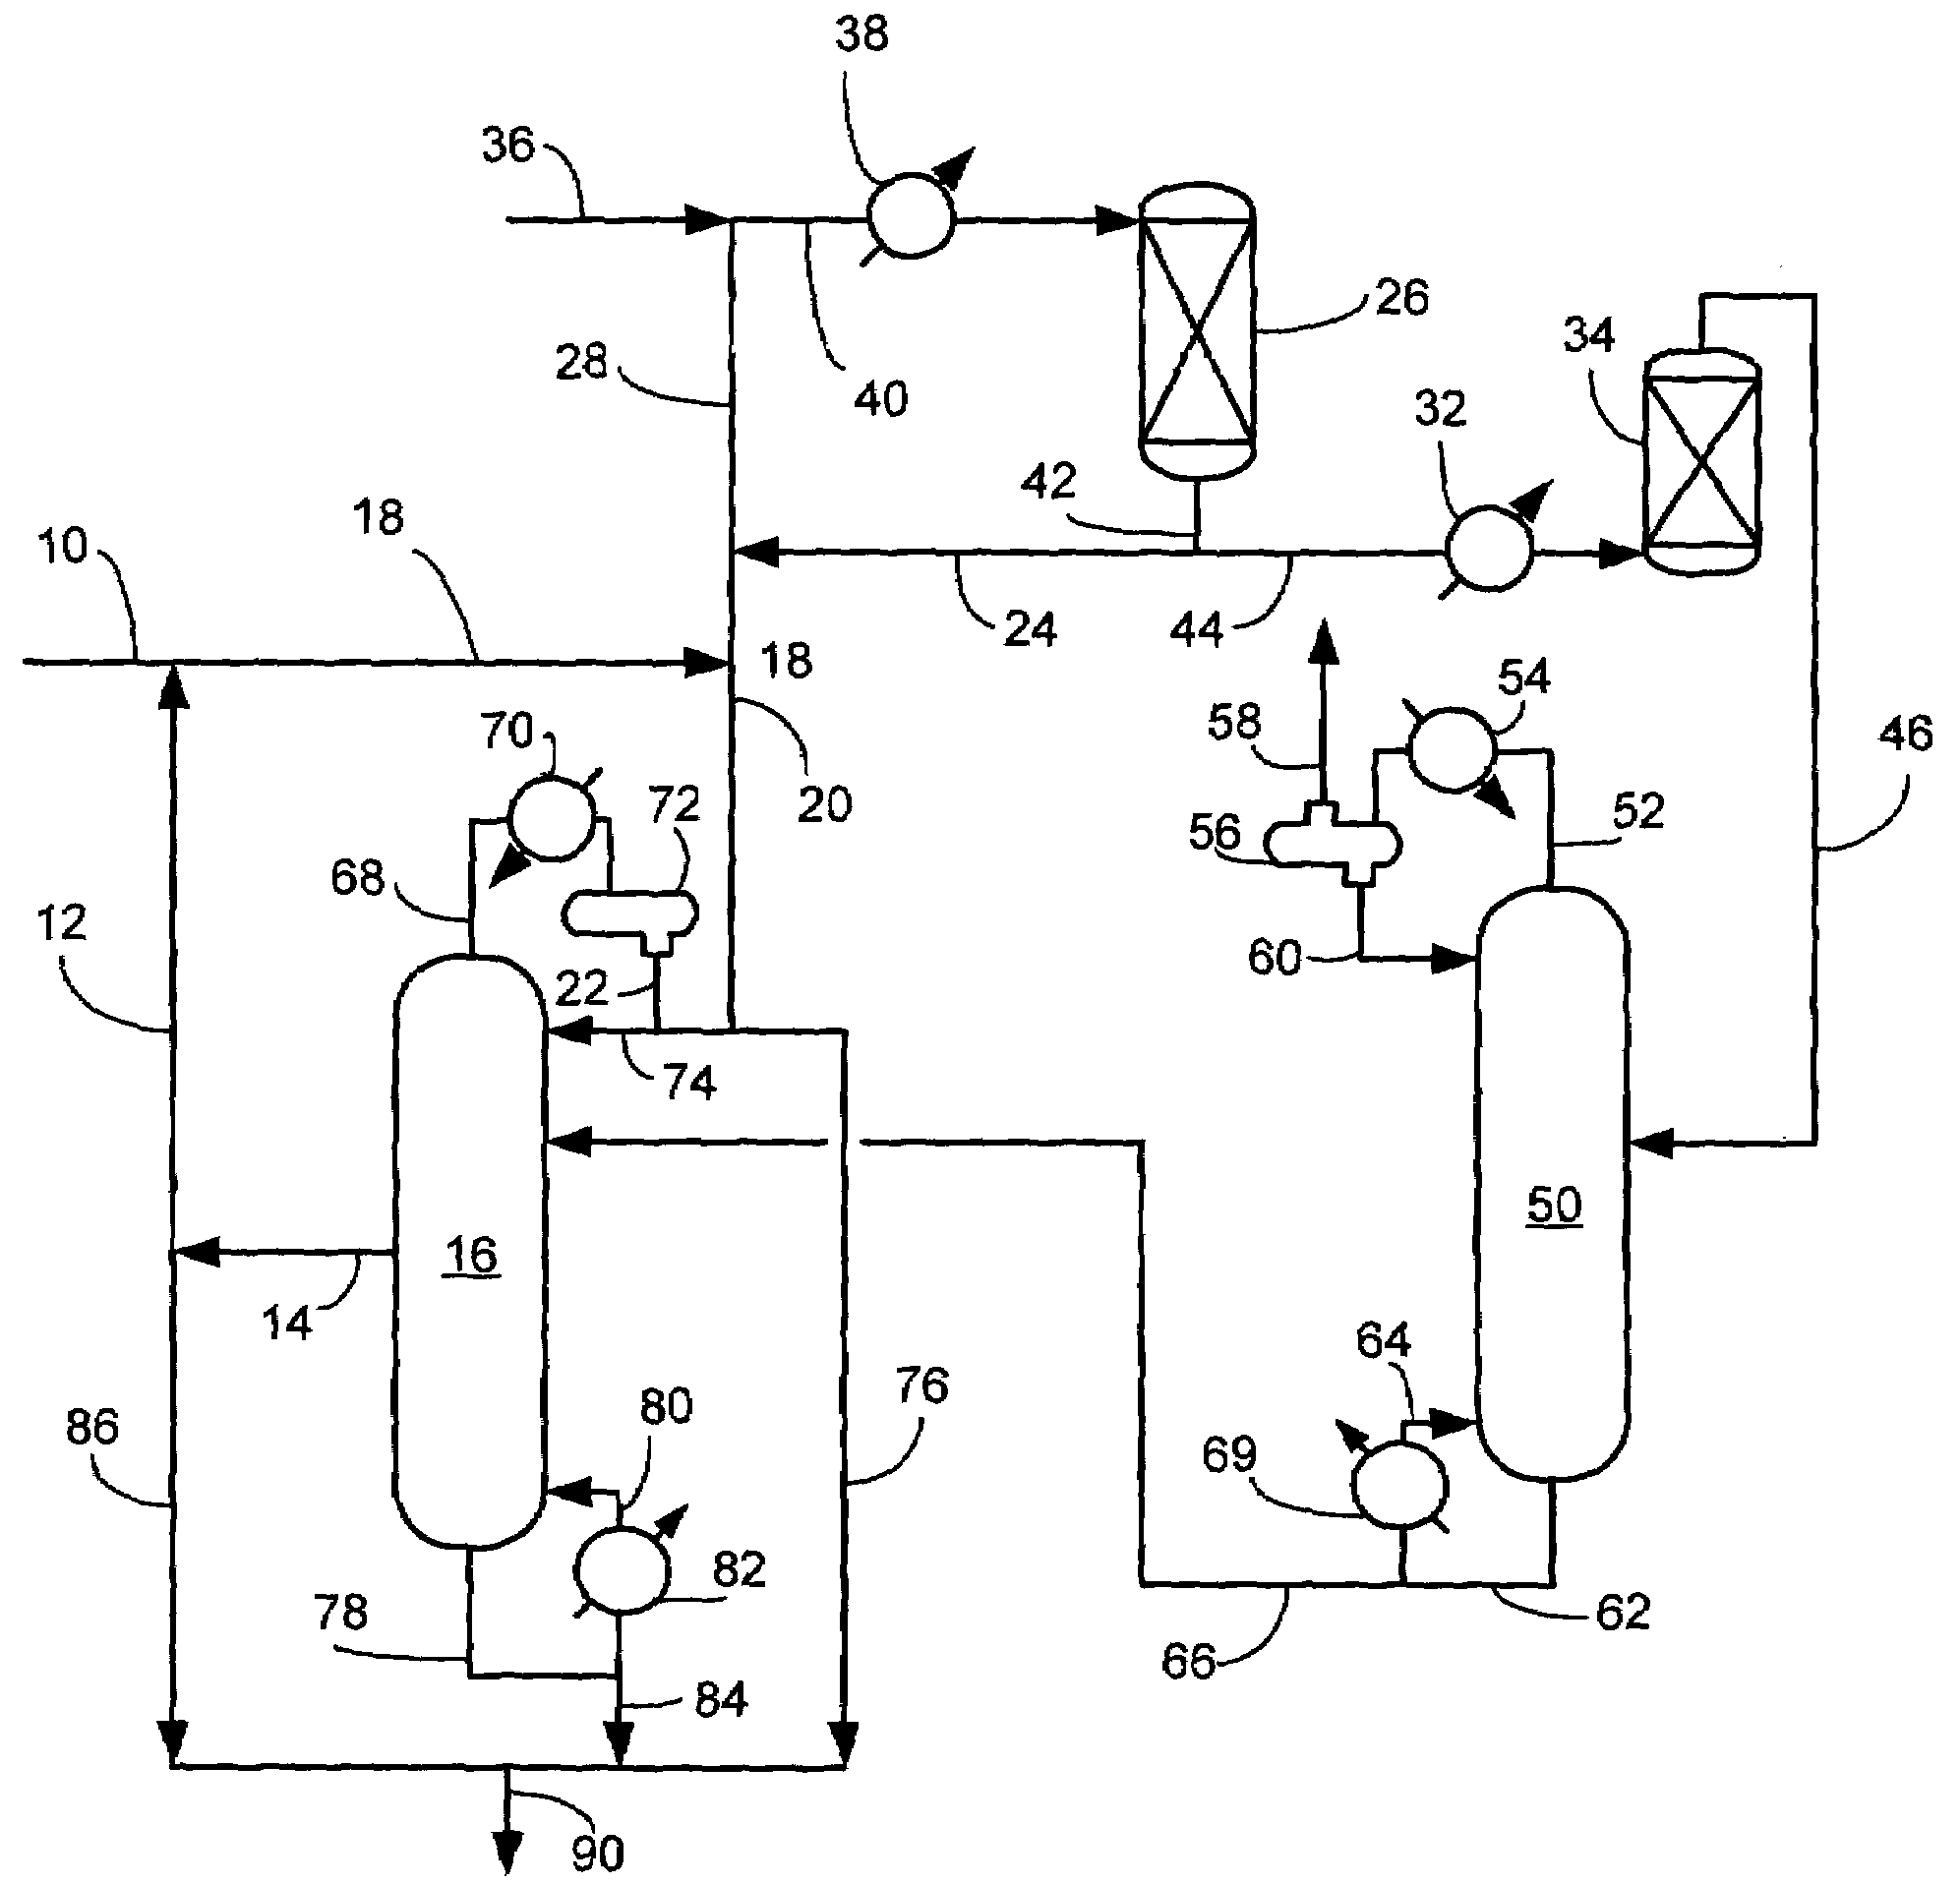 Apparatus and process for light olefin recovery